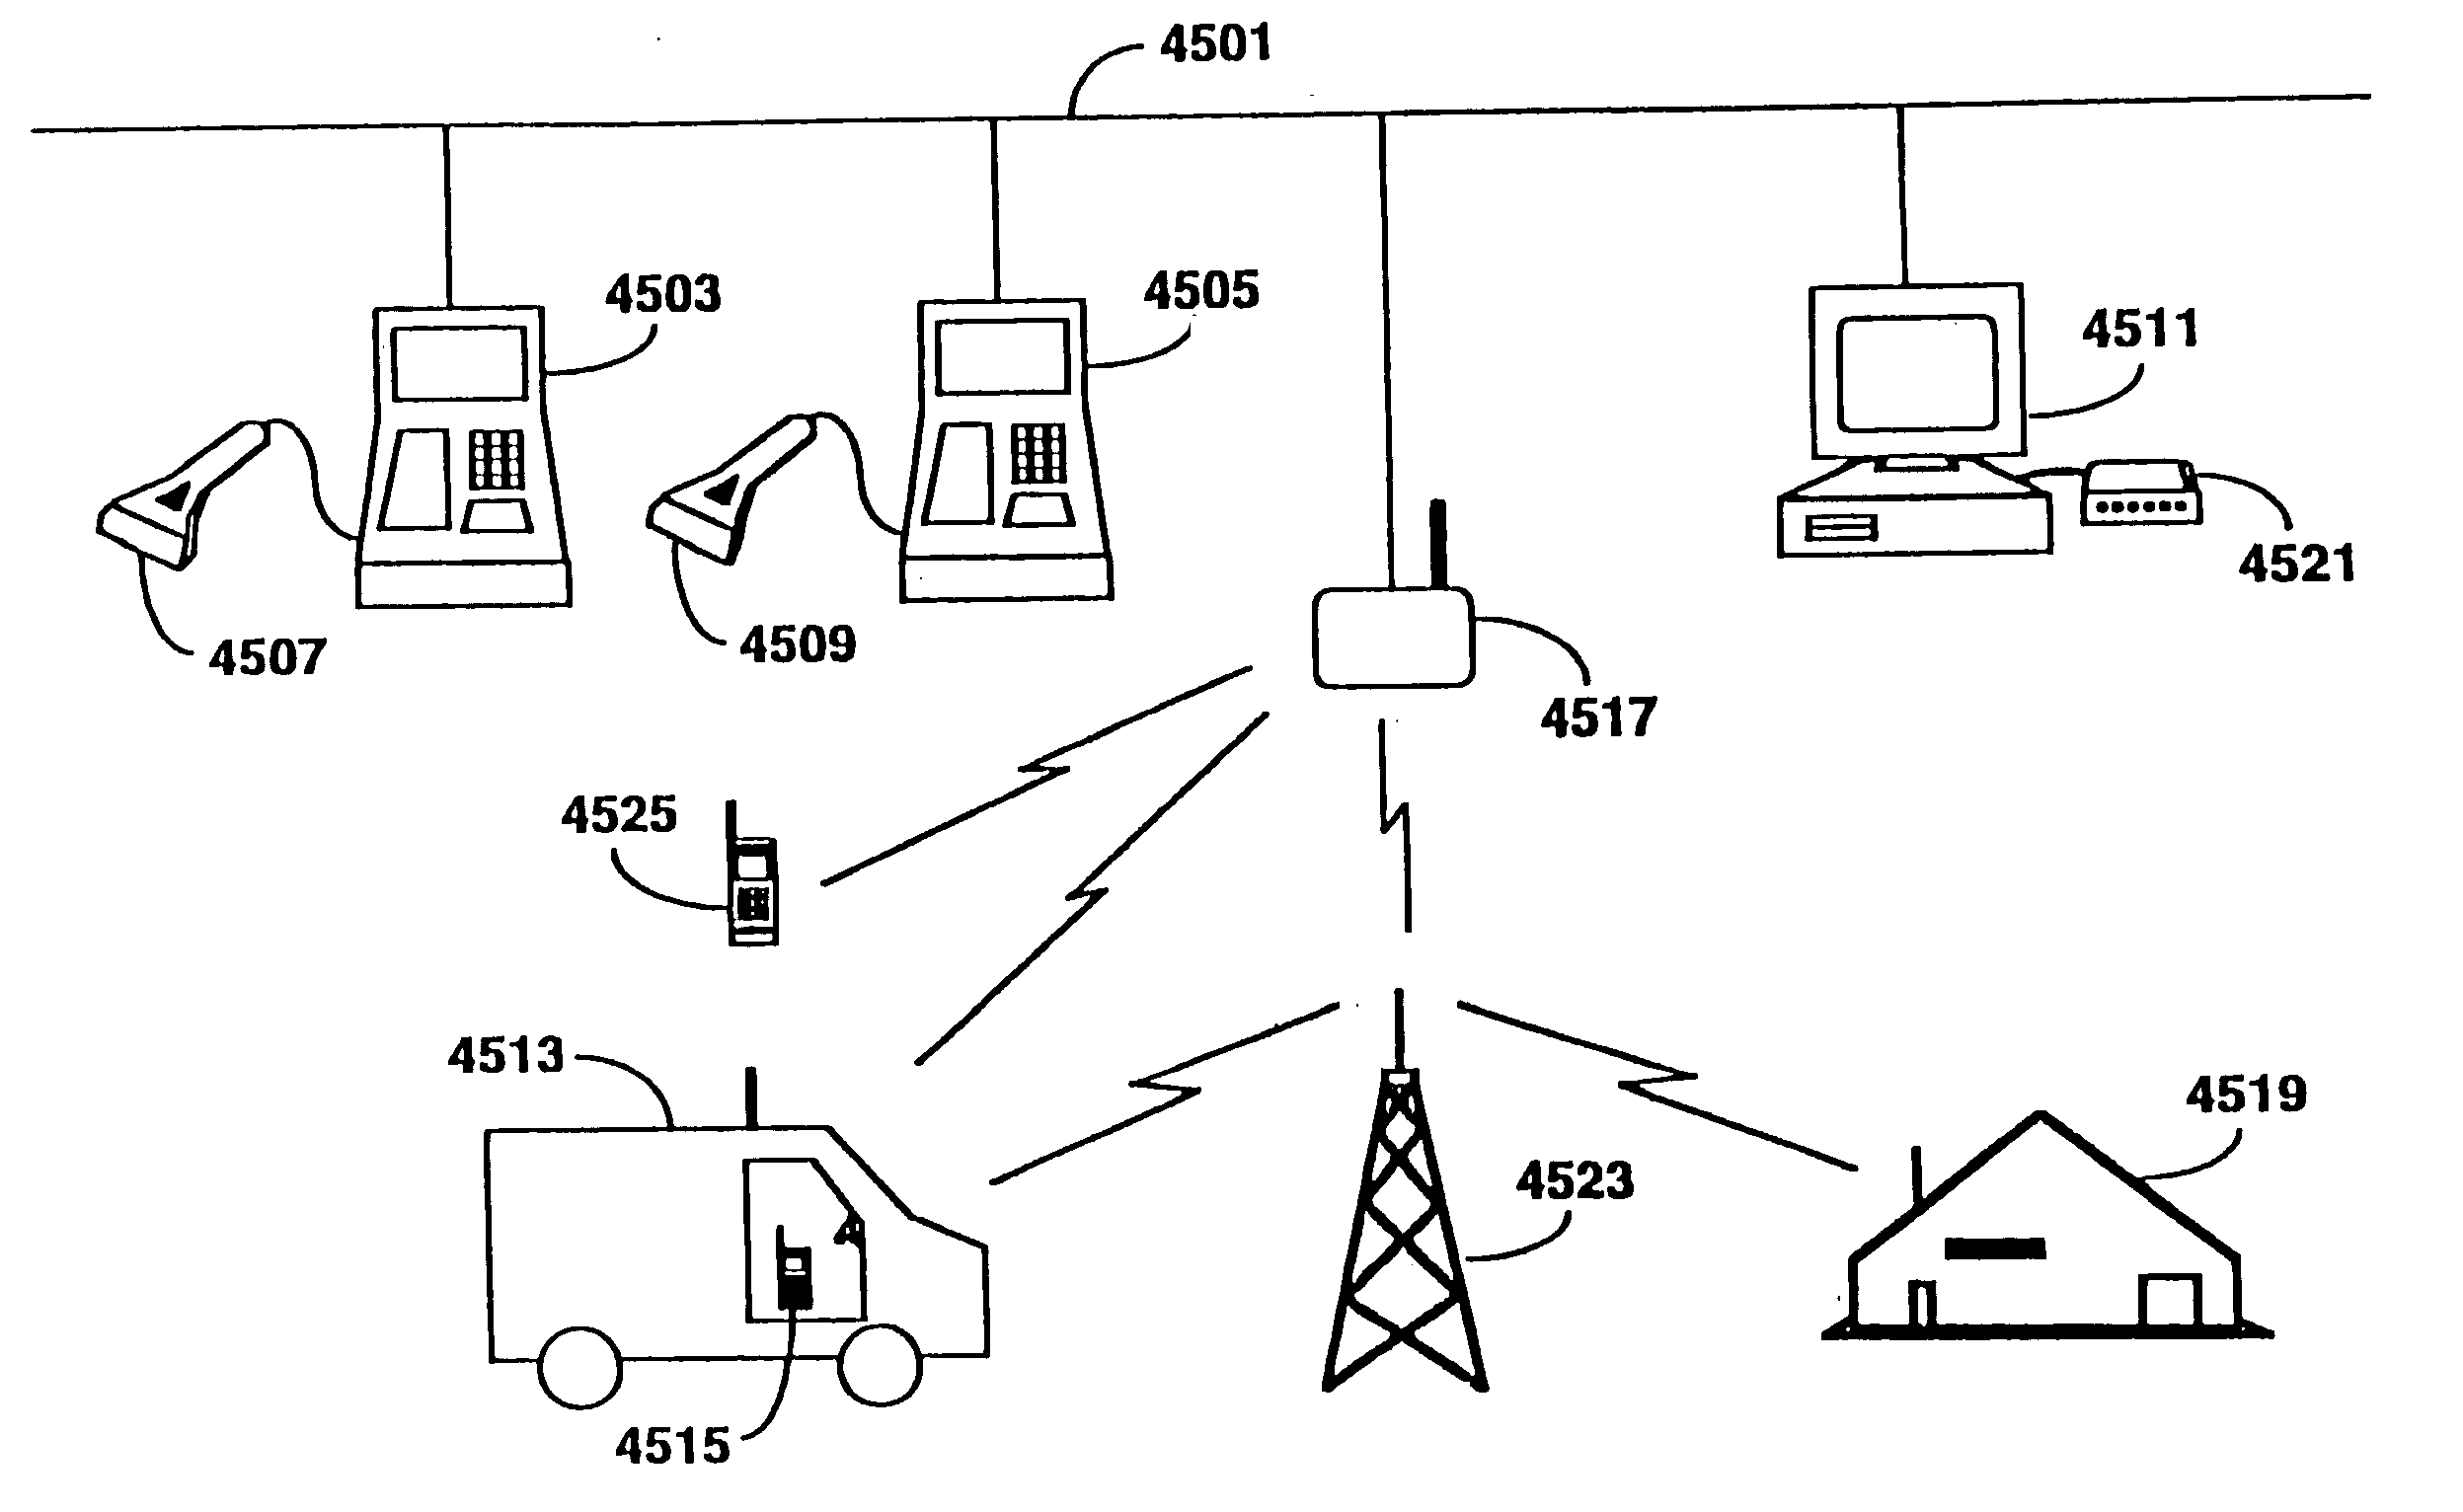 Hierarchical data collection network supporting packetized voice communications among wireless terminals and telephones